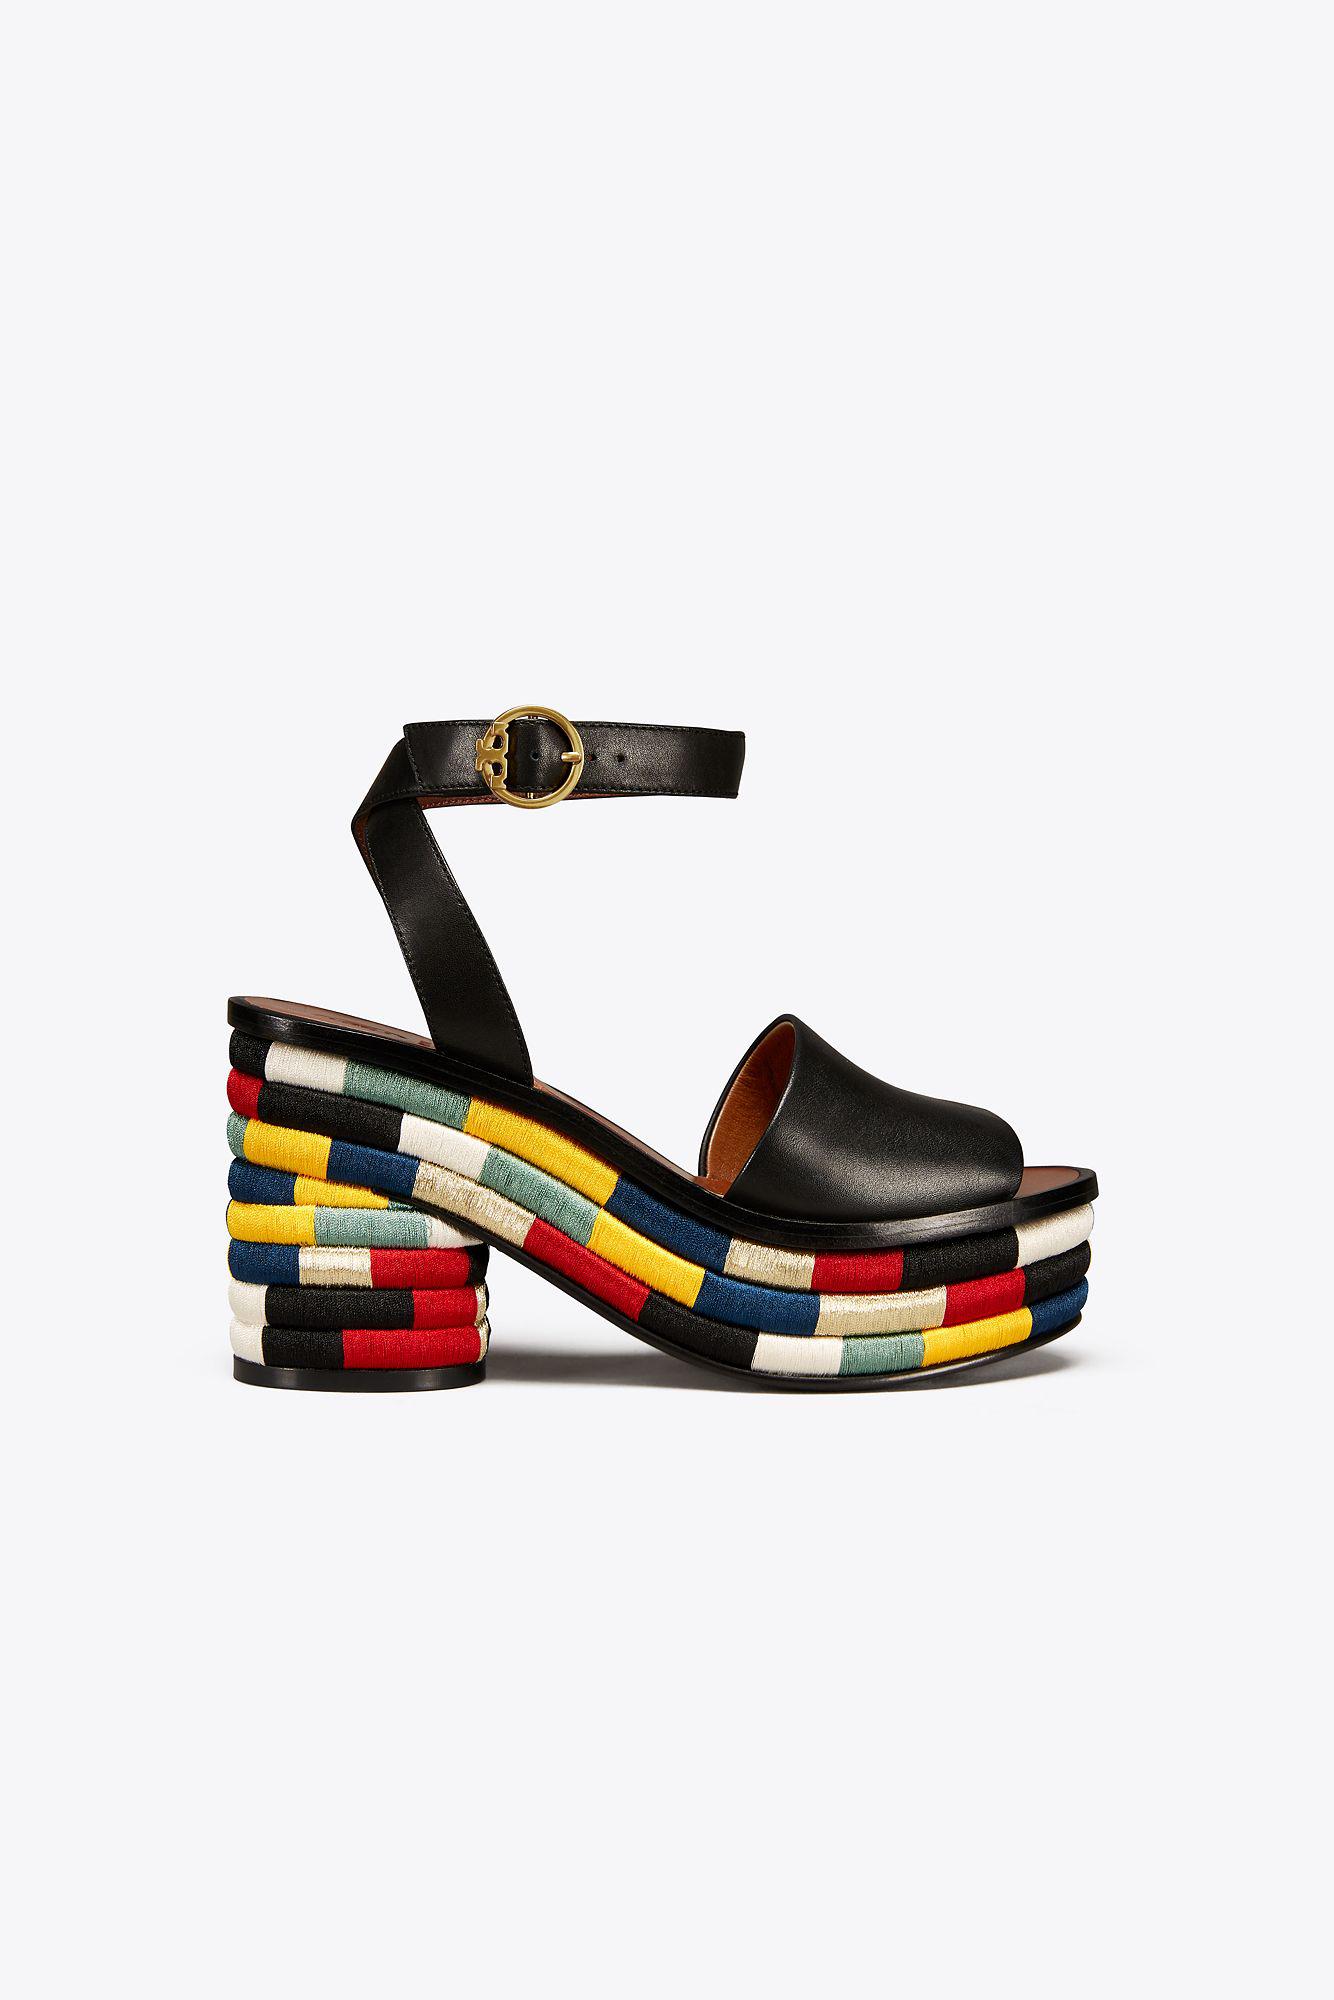 tory burch embroidered sandals